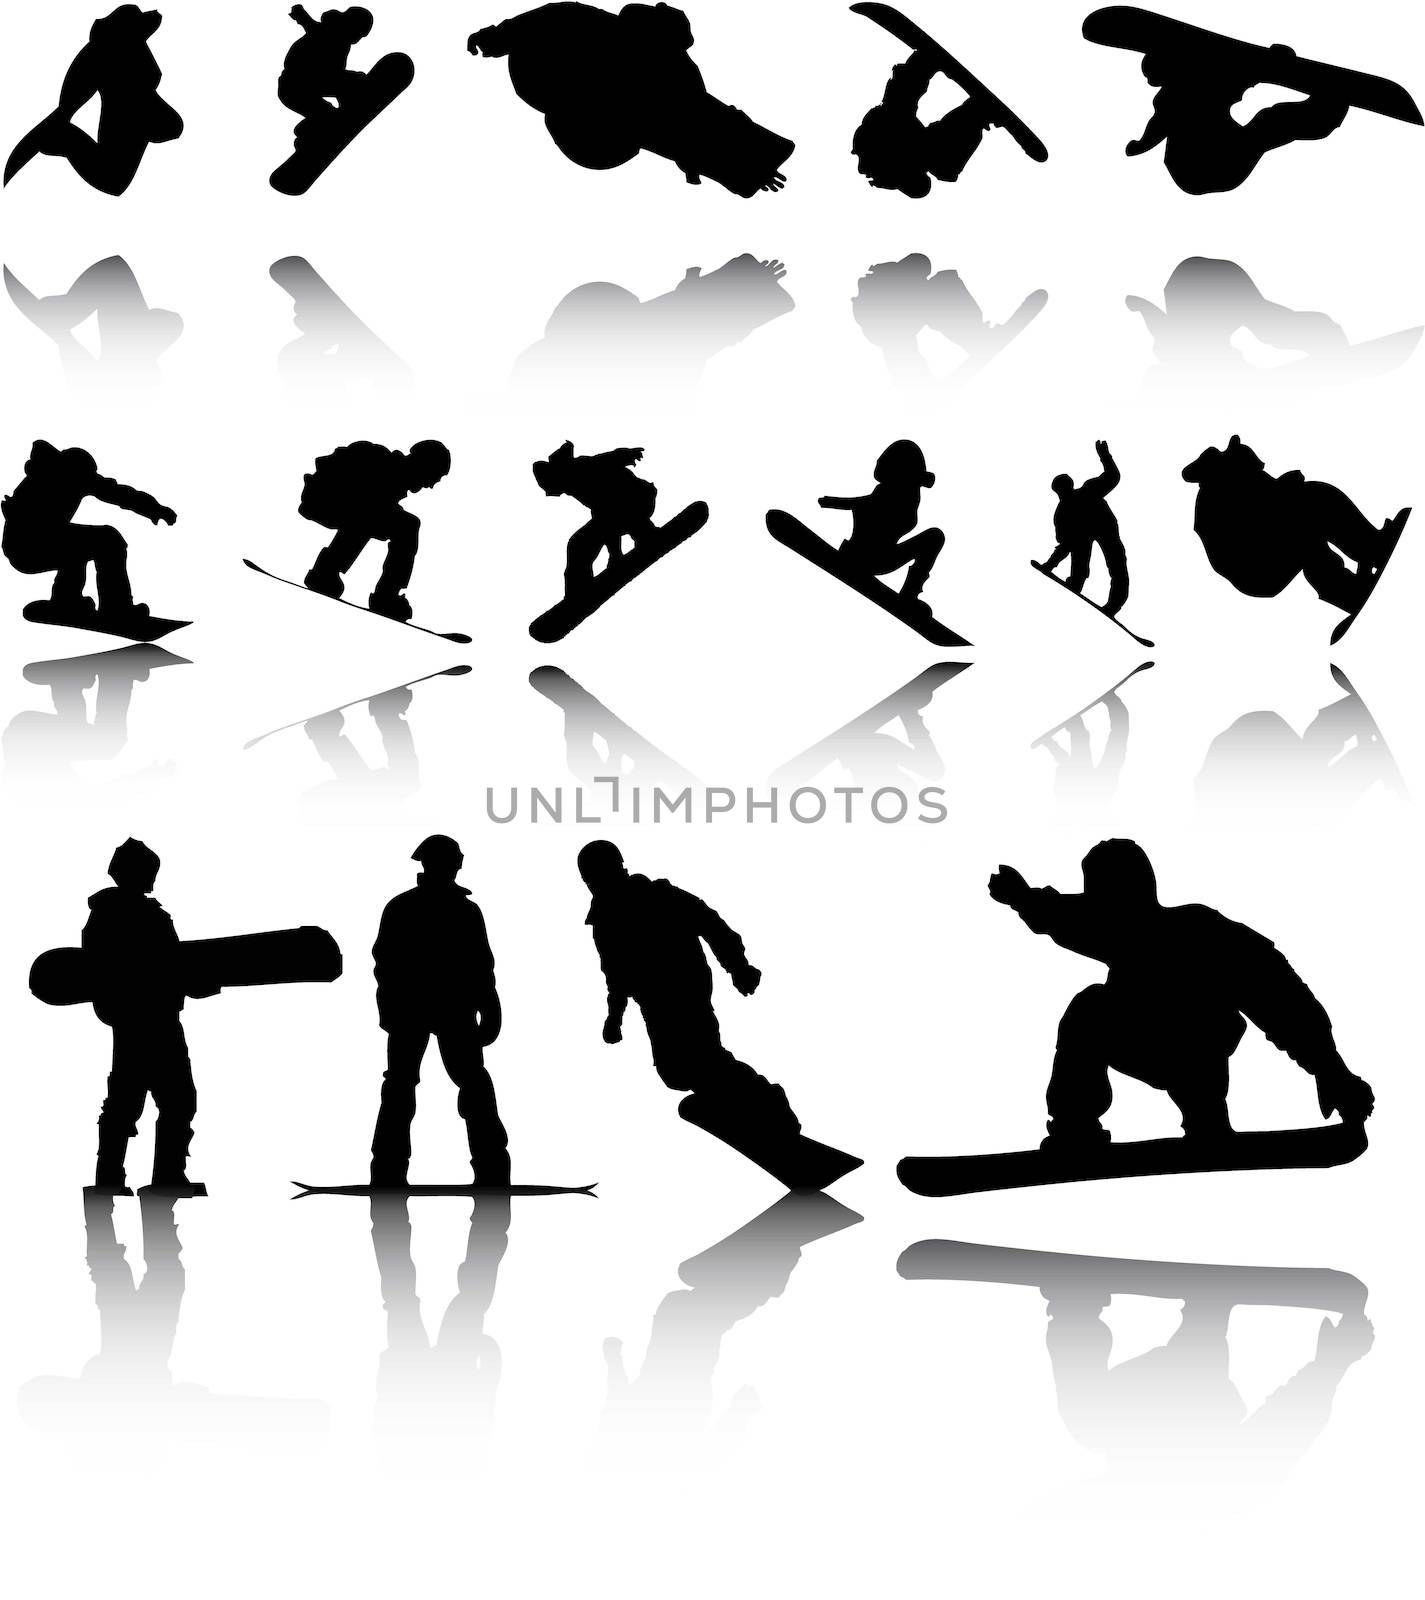 An Illustration of Silhouettes of Snowboarders with reflection